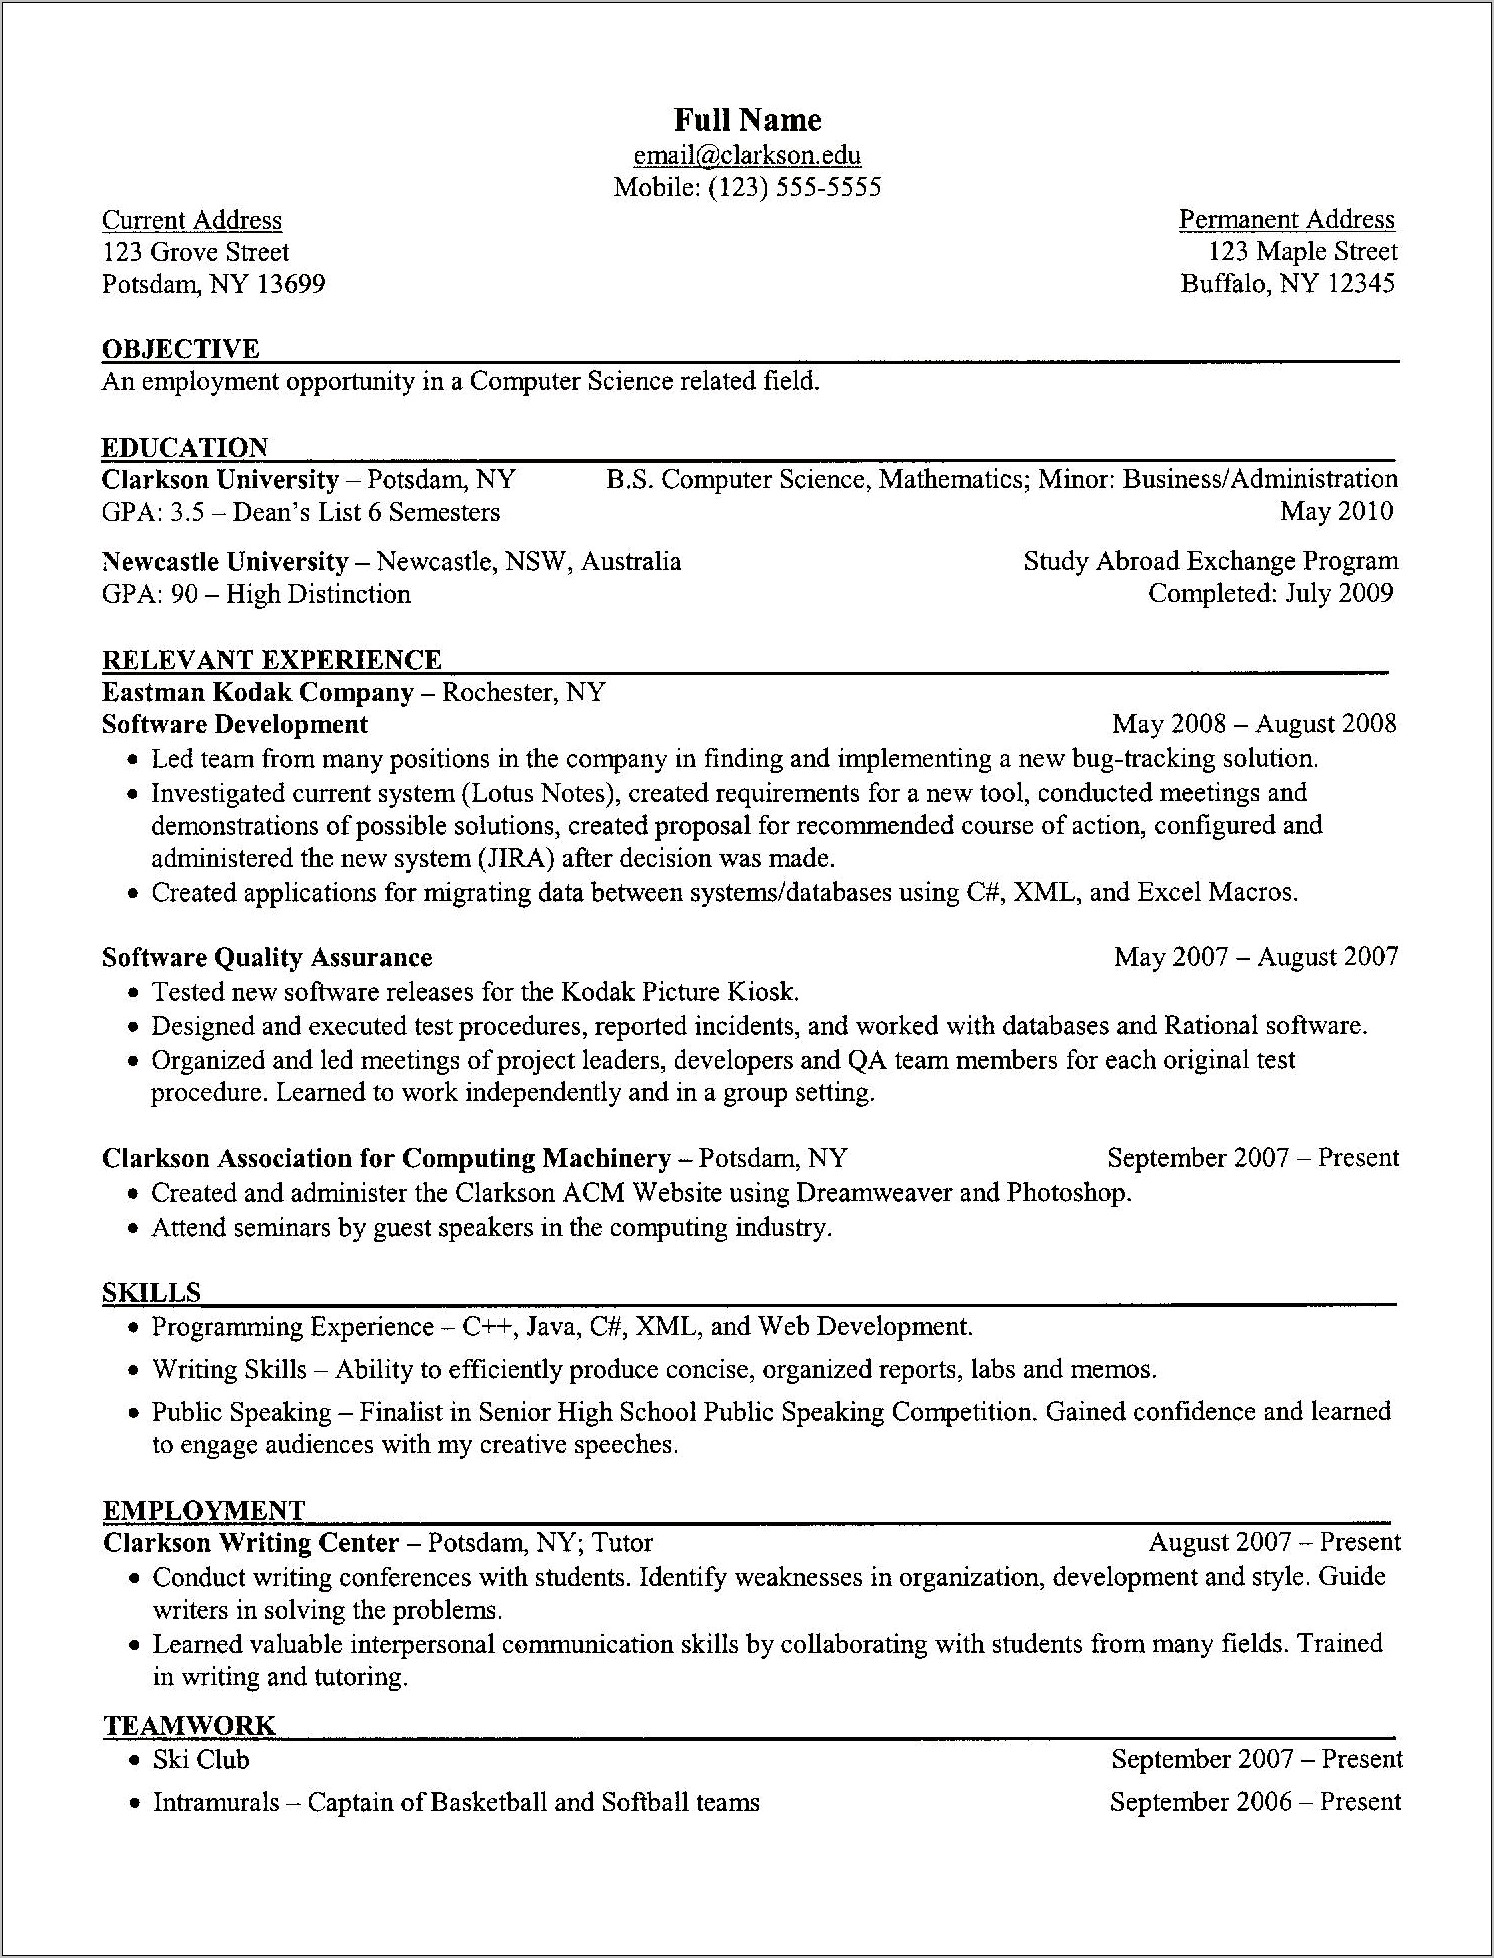 Resume If You Did Not Complete High School